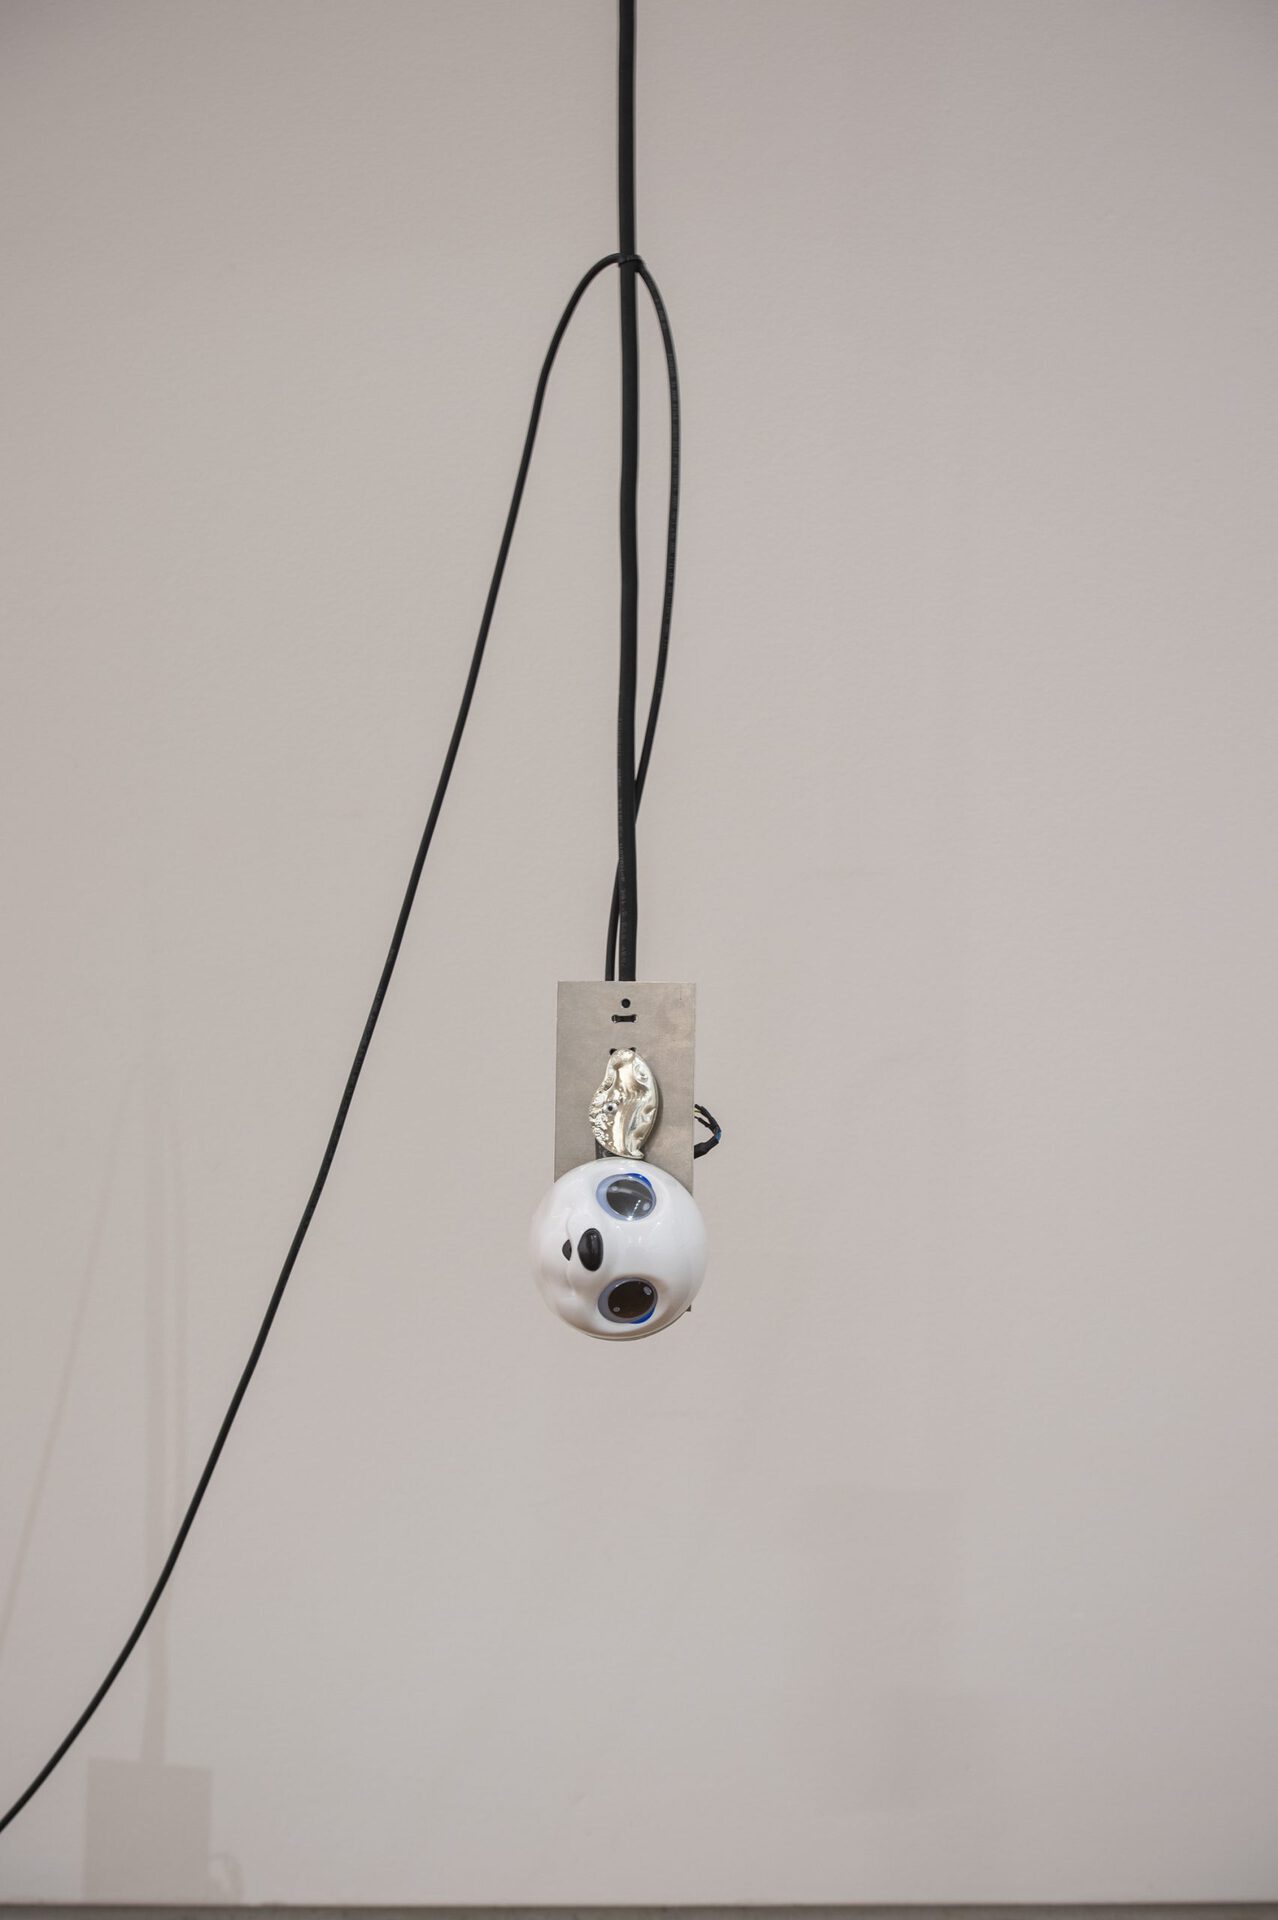 Robert Keil, "Strings", 2022, Toy (Robo Smart Puppy), cable, electronic hardware, software, metal, plastic